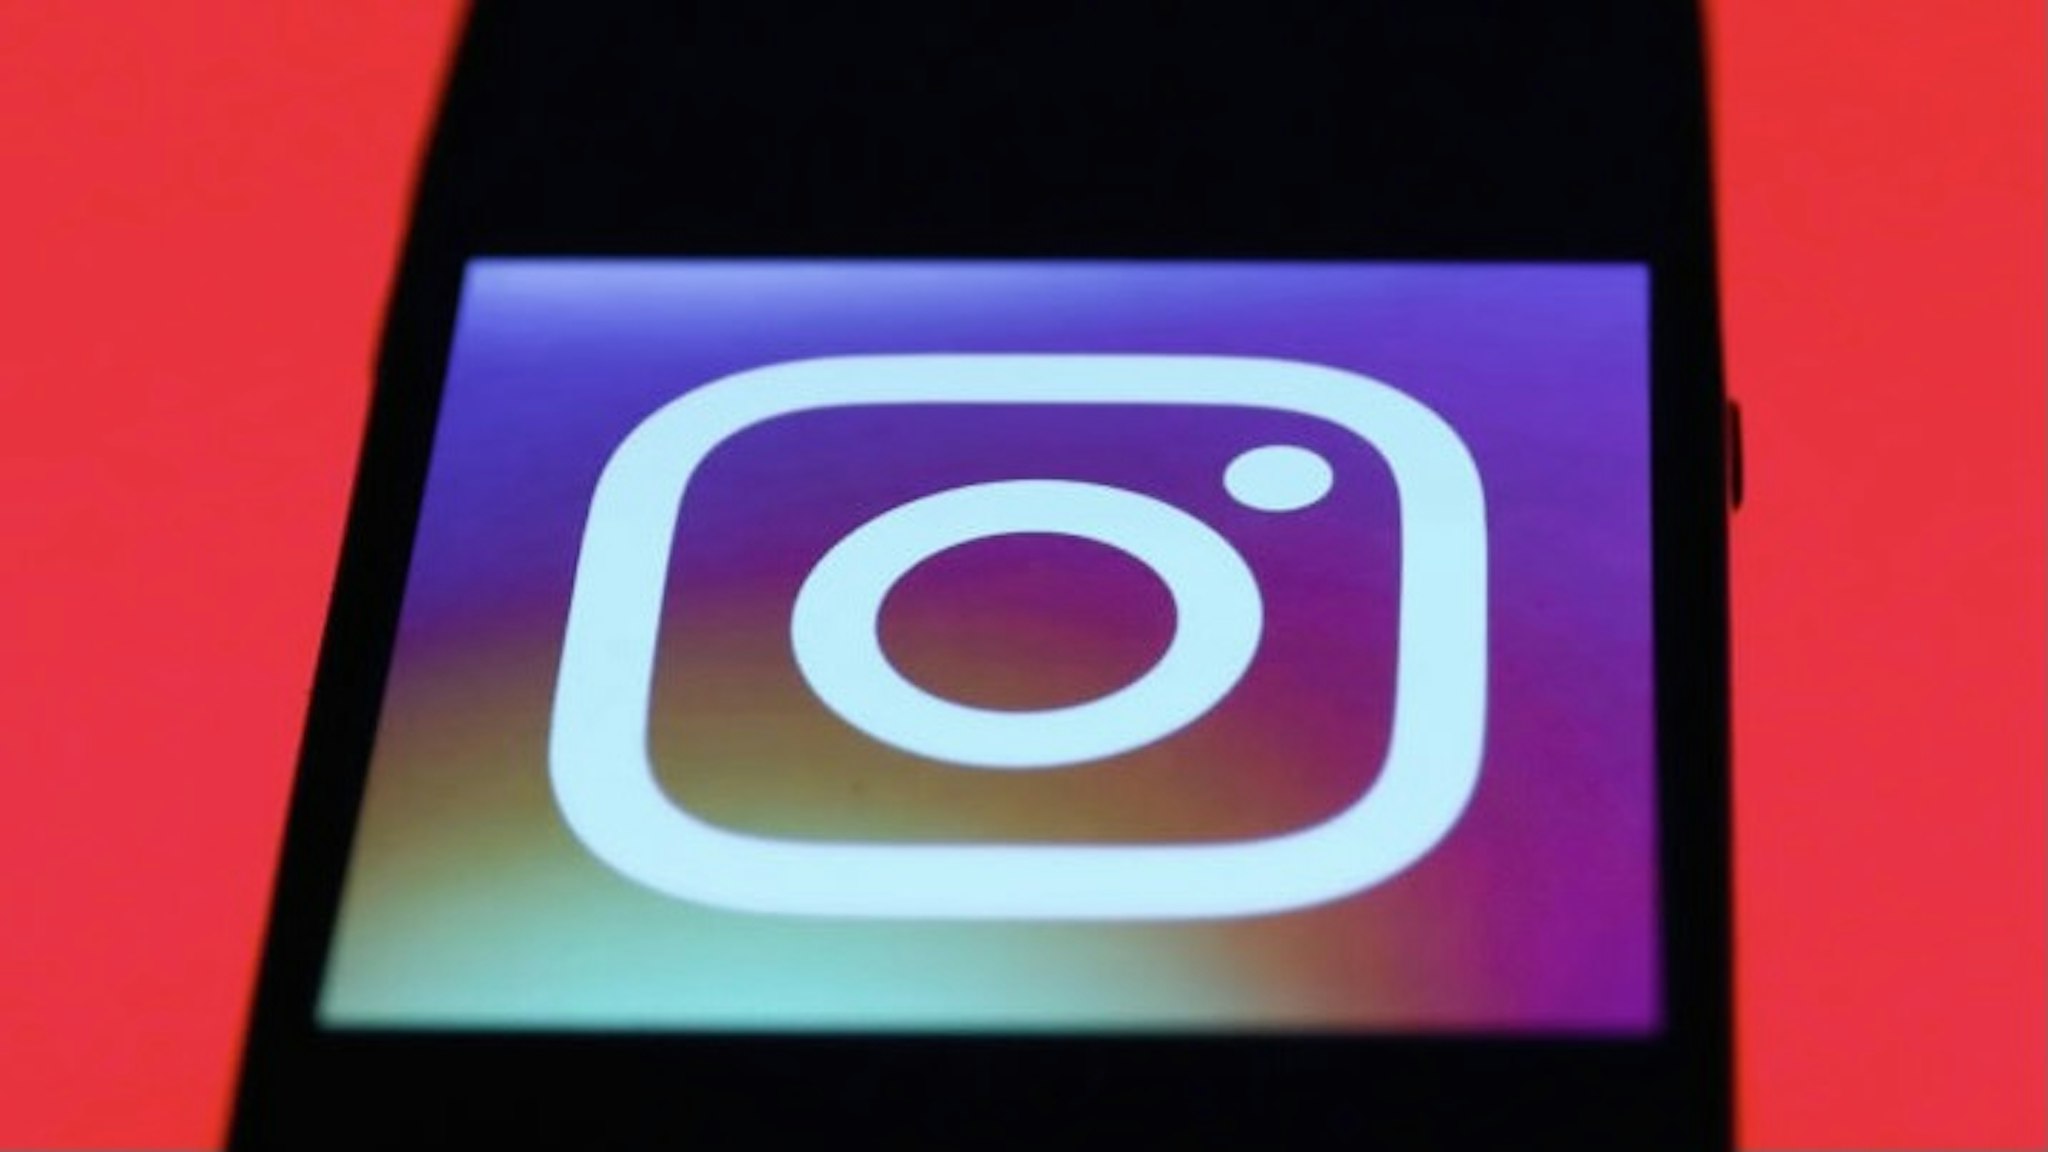 Instagram app icon is seen on the smartphone screen with covid-19sign in the background in this illustration photo taken in Poland on March 21, 2020. (Photo by Jakub Porzycki/NurPhoto)